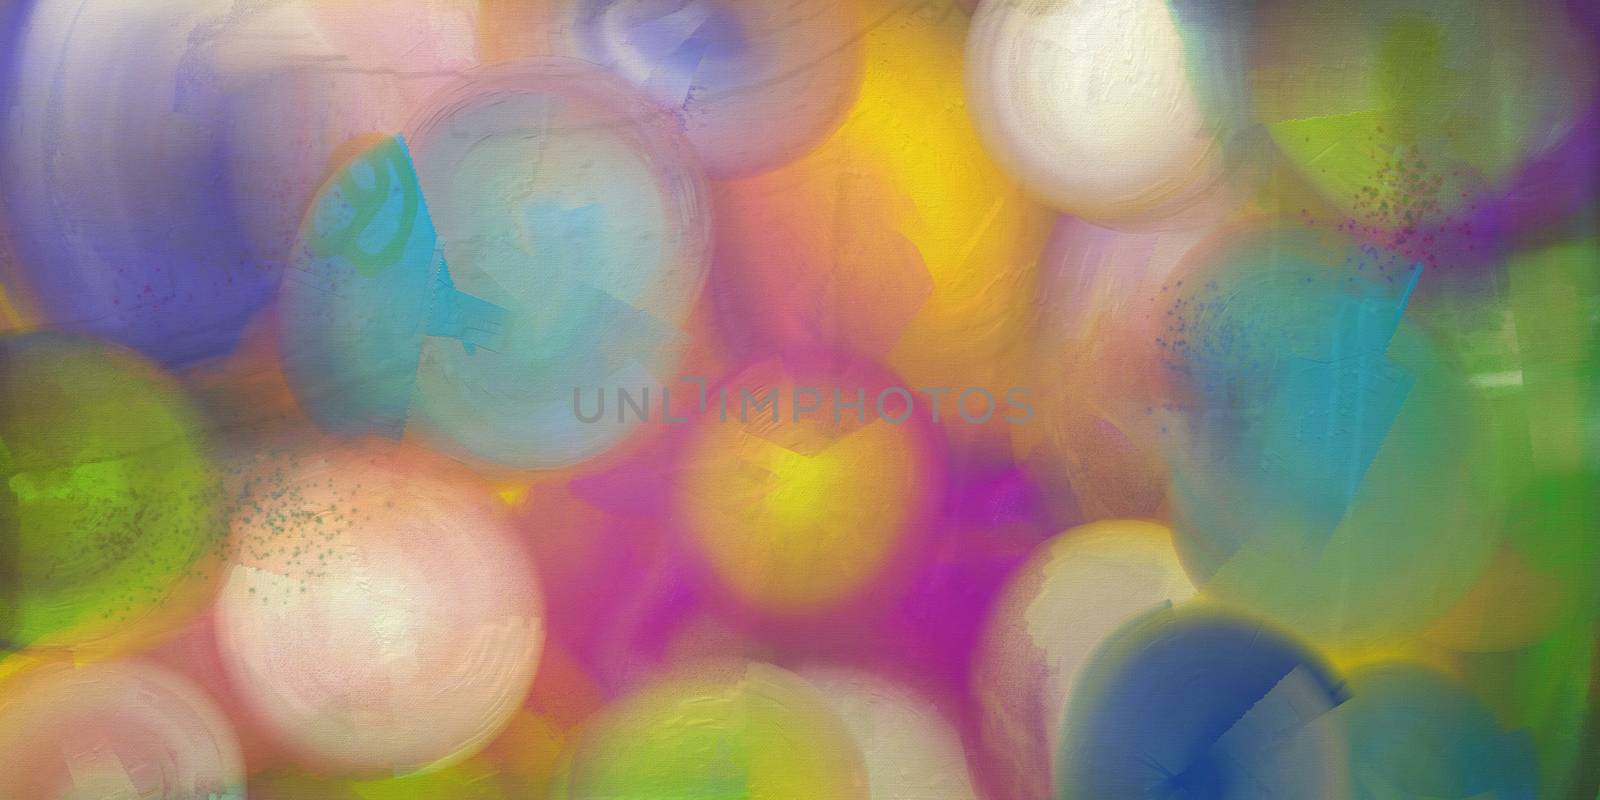 Circles abstract illustration. Round brush strokes paint colorful background pattern